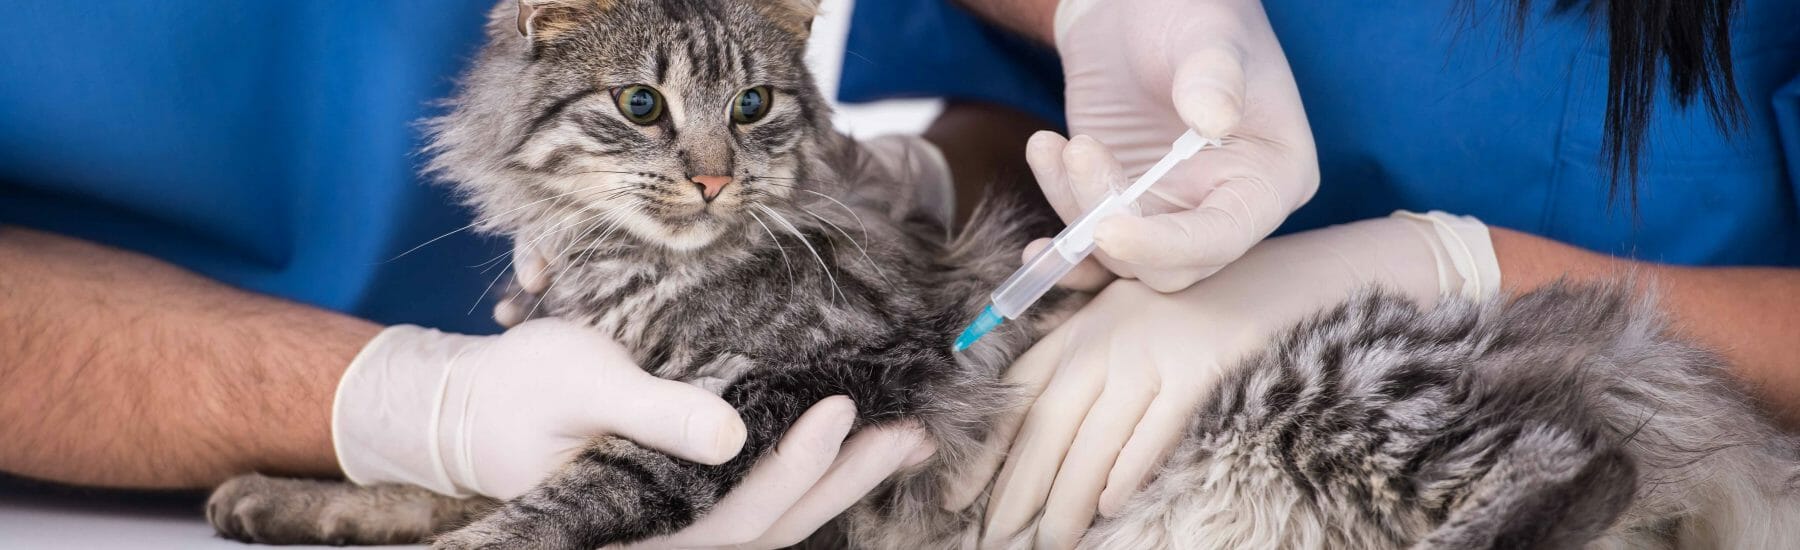 Cat getting a vaccination